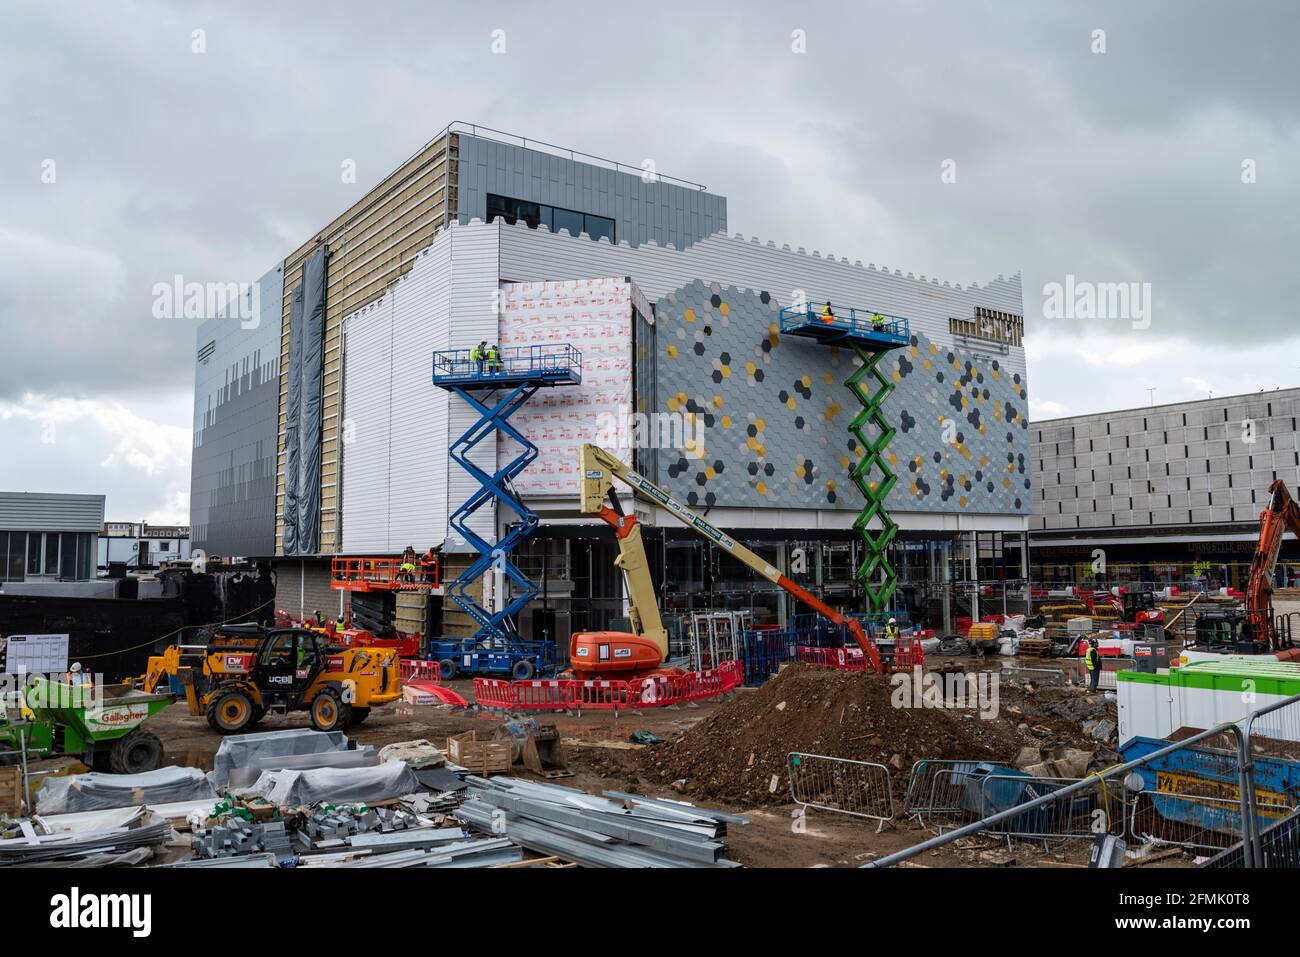 Redevelopment in Basildon, Essex, UK. East Square construction site which include Empire cinema. Cranes and scissor lift platforms, plant on site Stock Photo